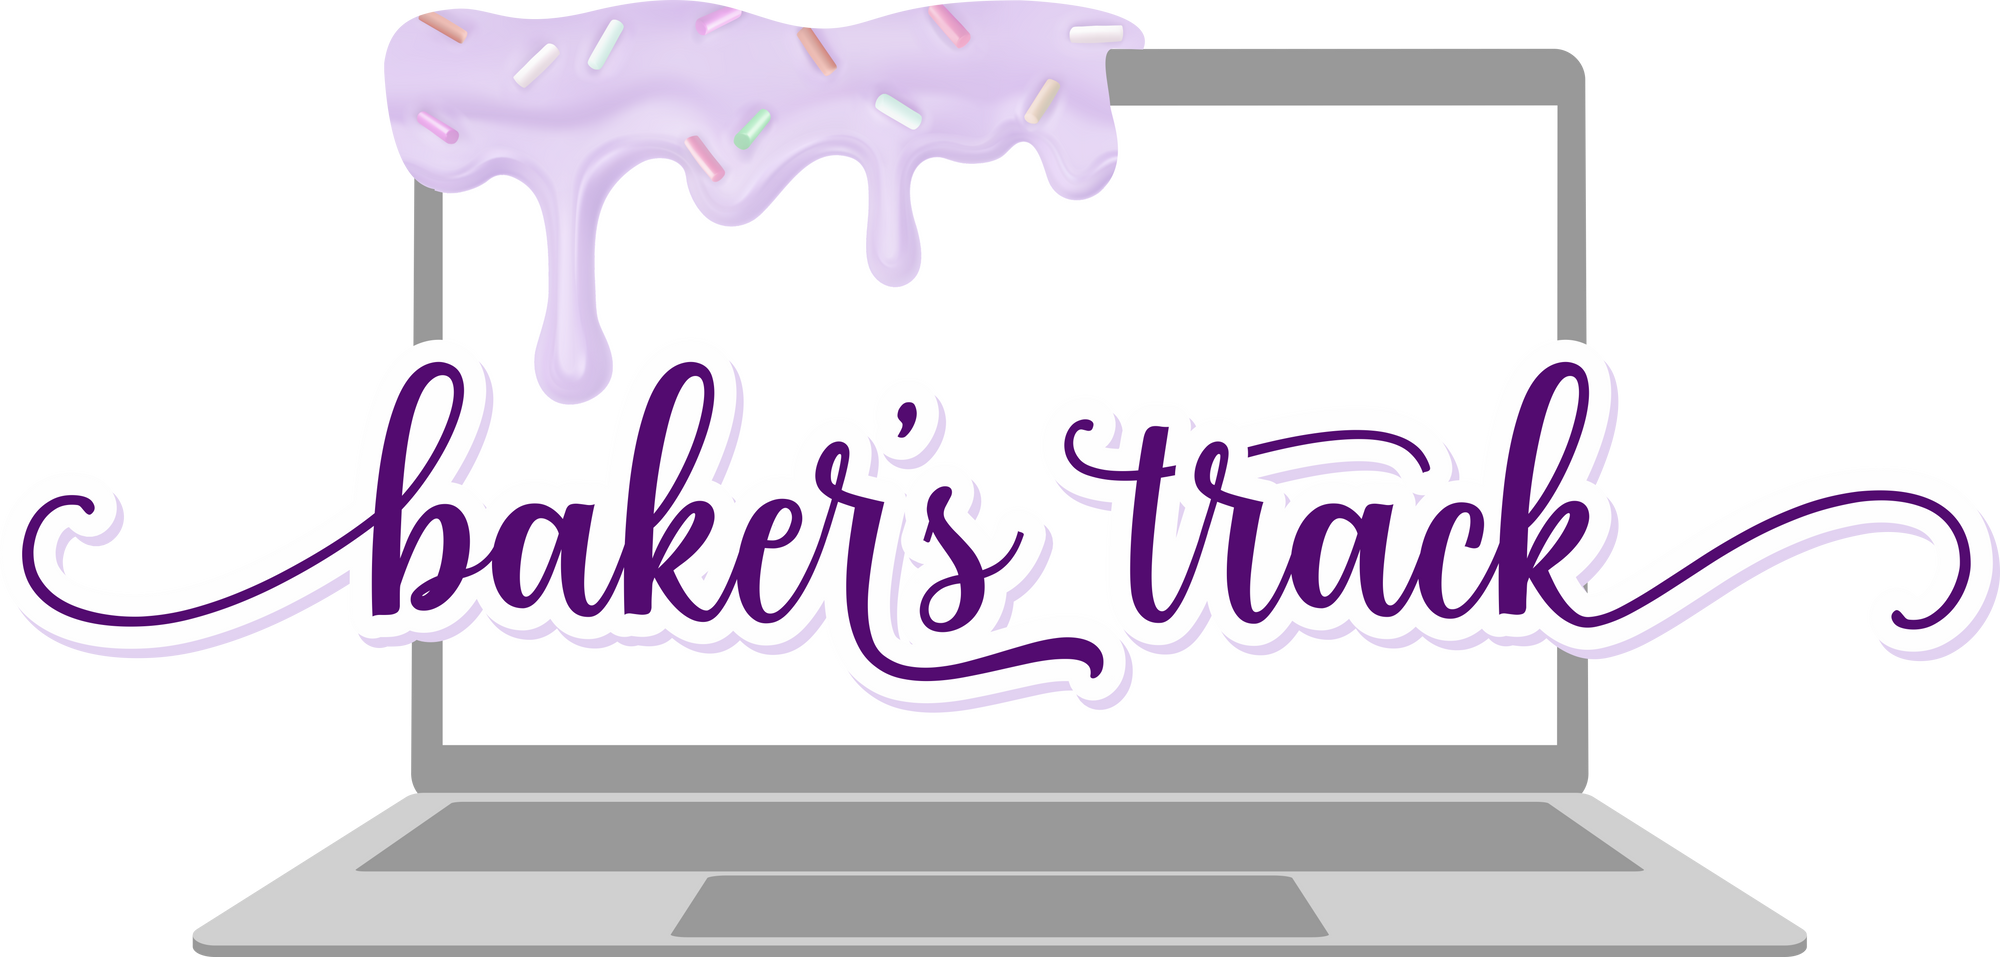 Bakers Track